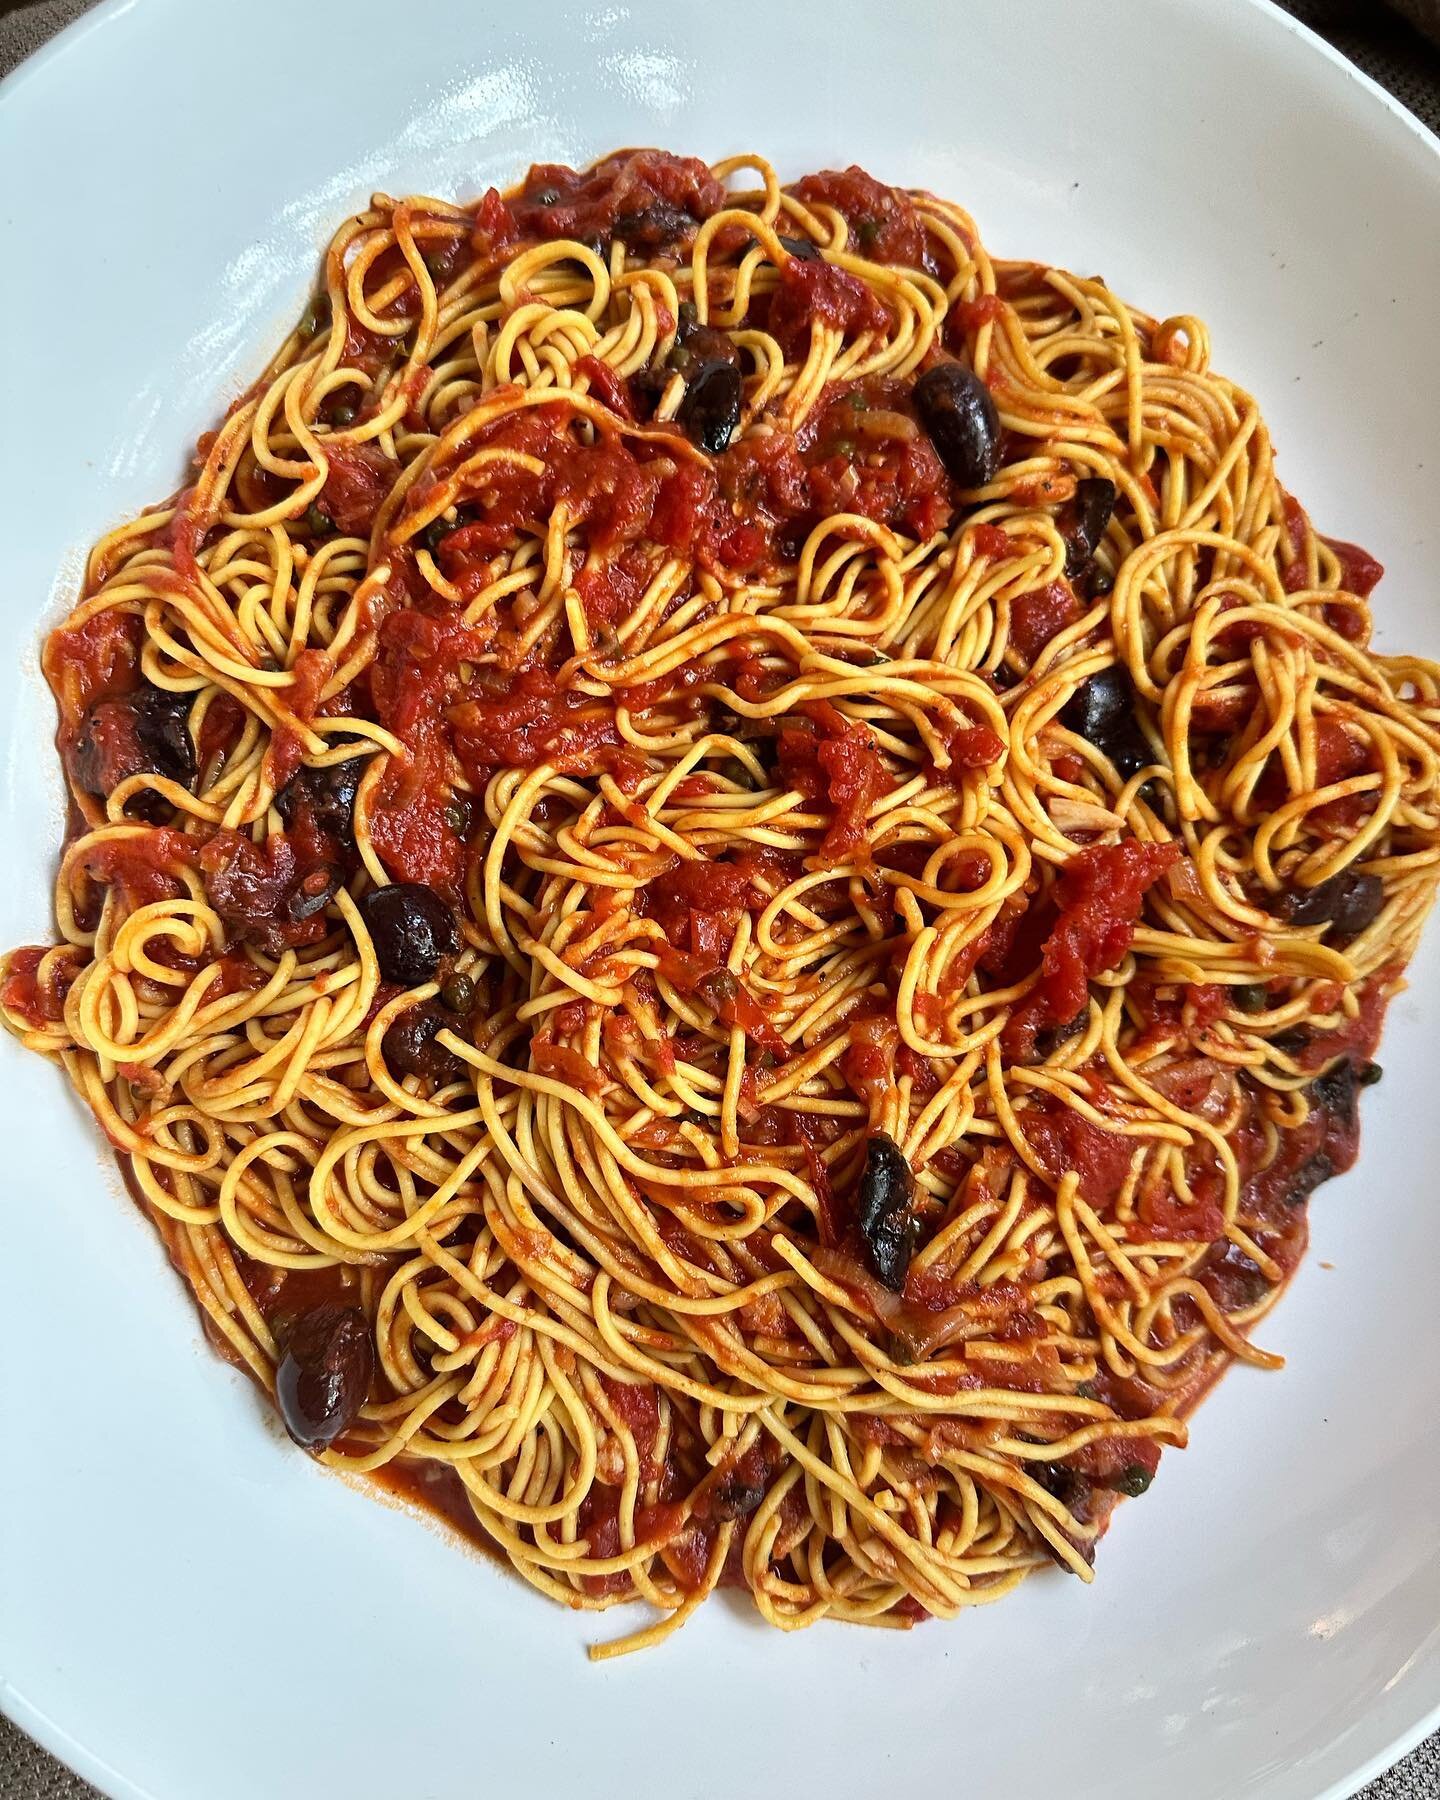 From the fresh pasta I made over the weekend I was inspired to make Spaghetti alla Puttanesca for a dinner party I hosted. The fresh spaghetti makes a world of difference, combined with San Marzano tomatoes, shallots, garlic, anchovies, Kalamata oliv